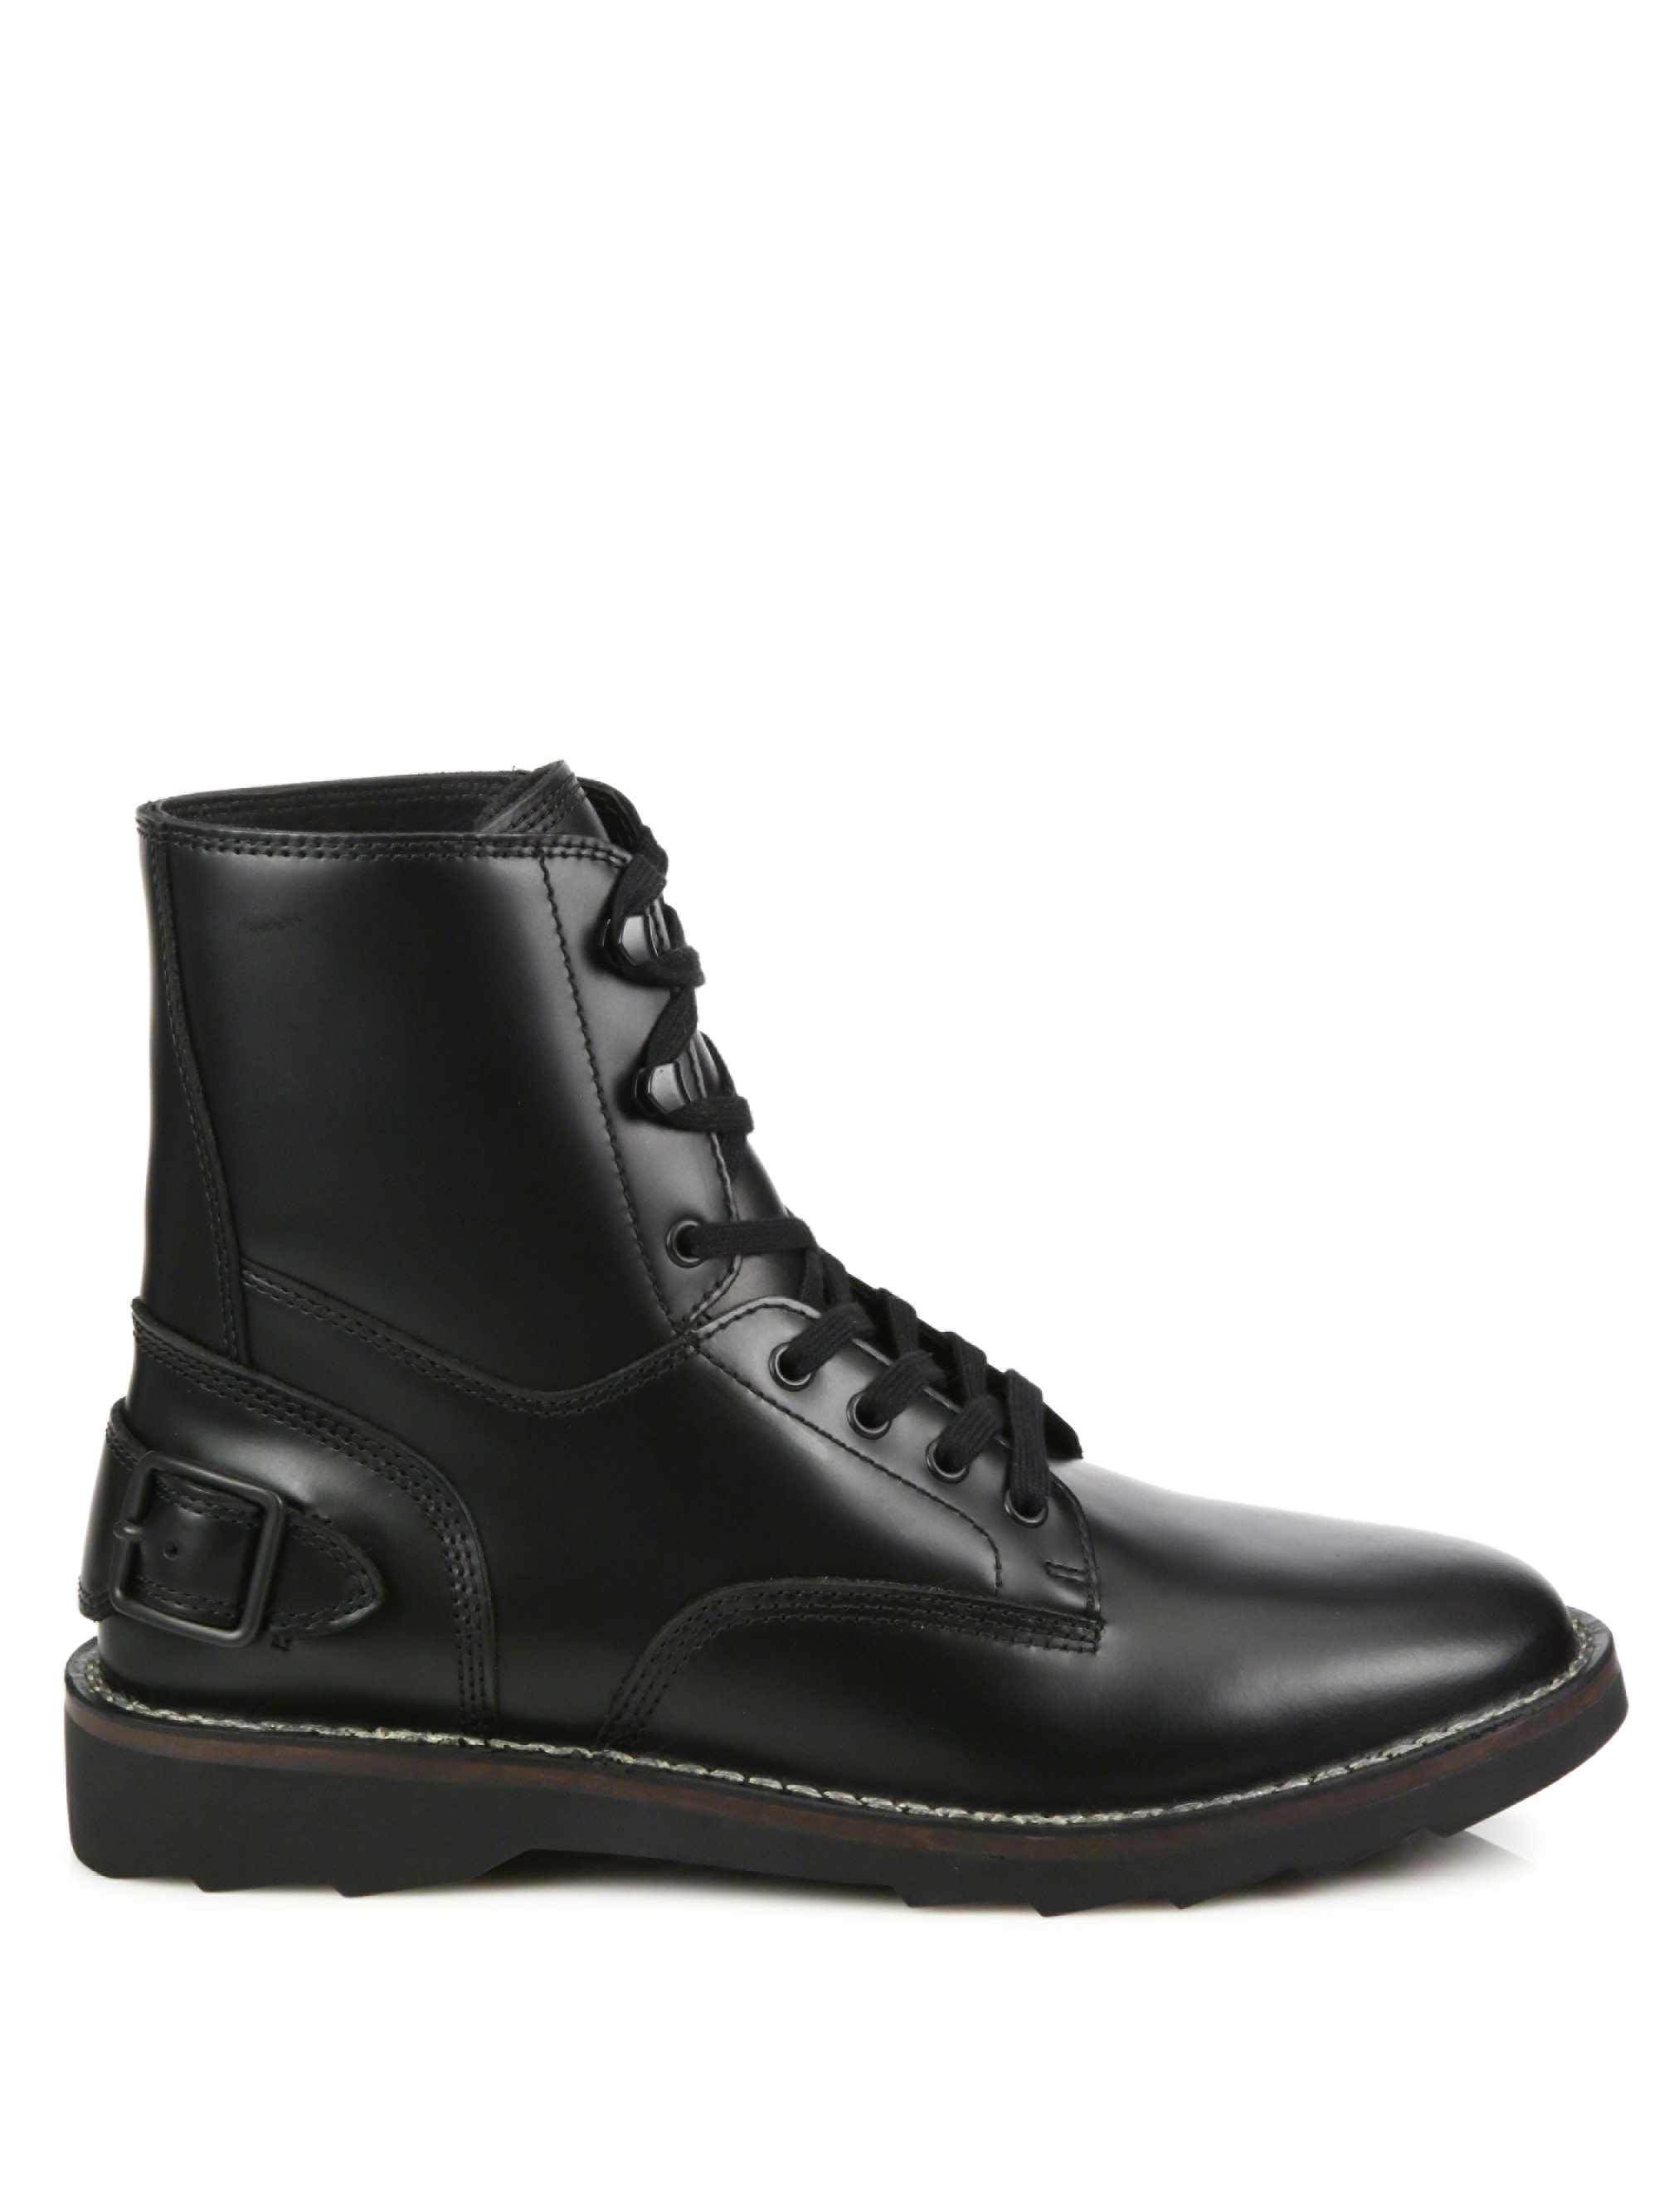 COACH Leather 1941 Combat Boots in Black for Men - Lyst